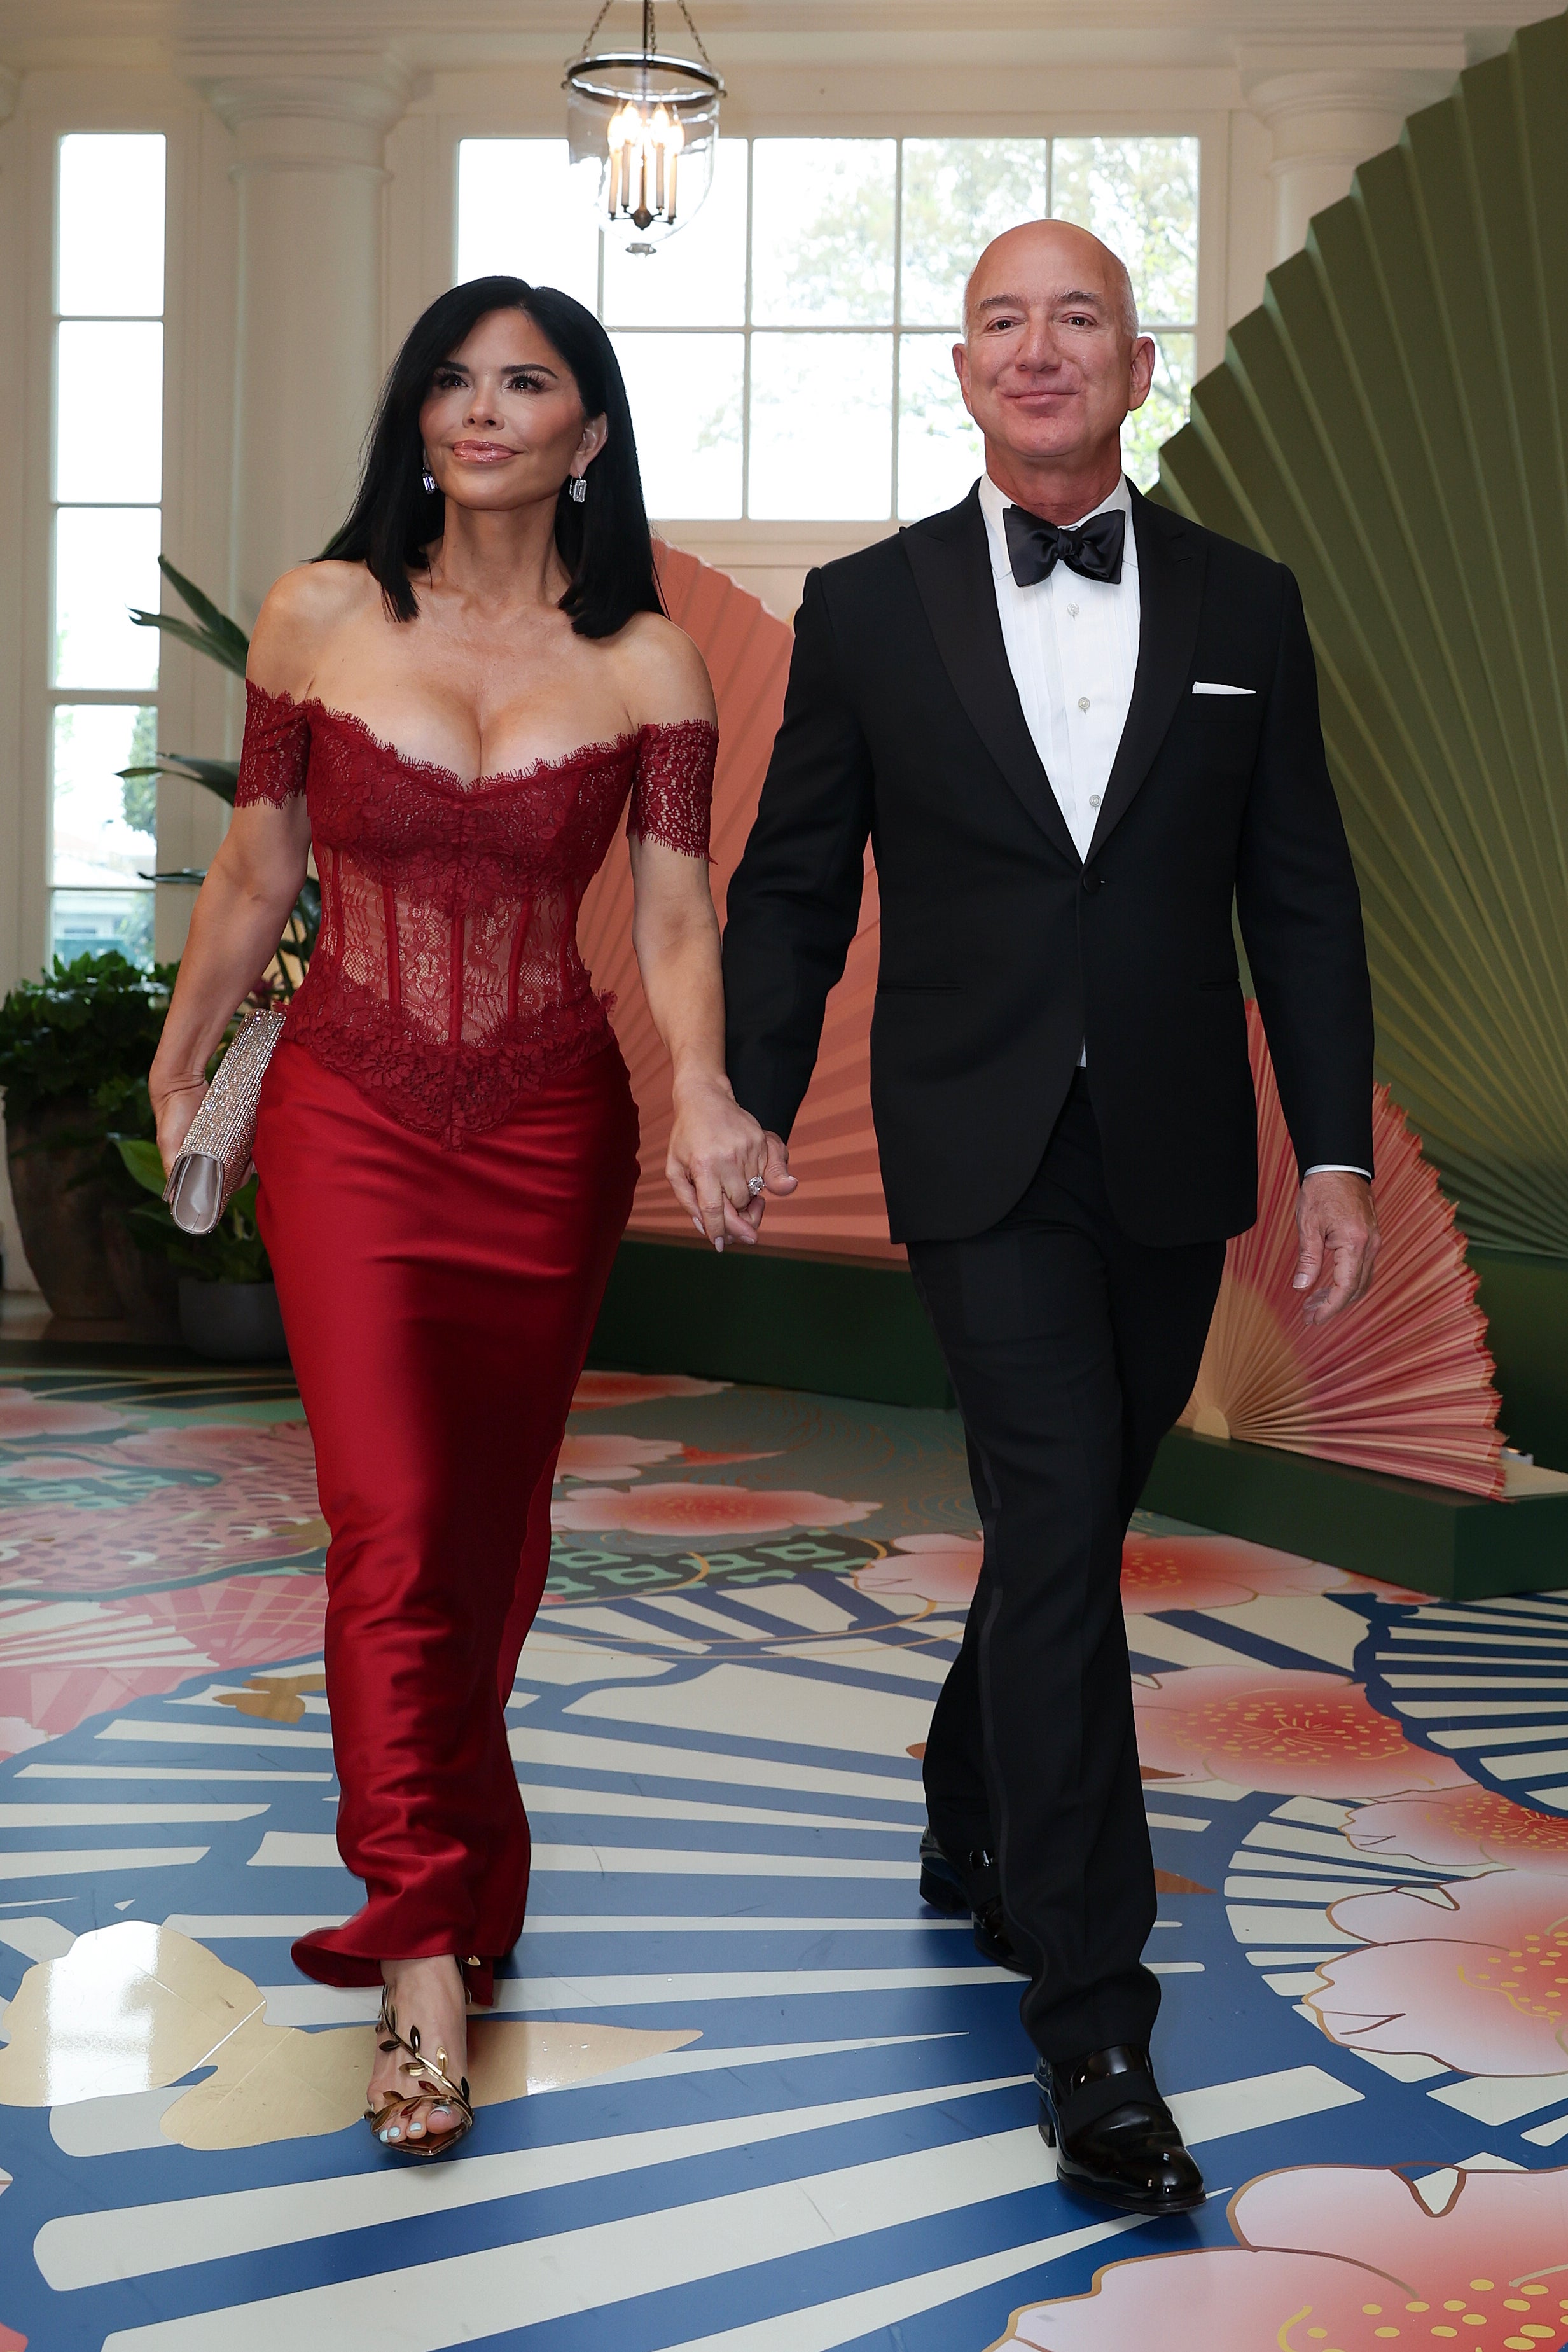 Jeff Bezos and his fiancee Lauren Sanchez arrive at the White House for the state dinner